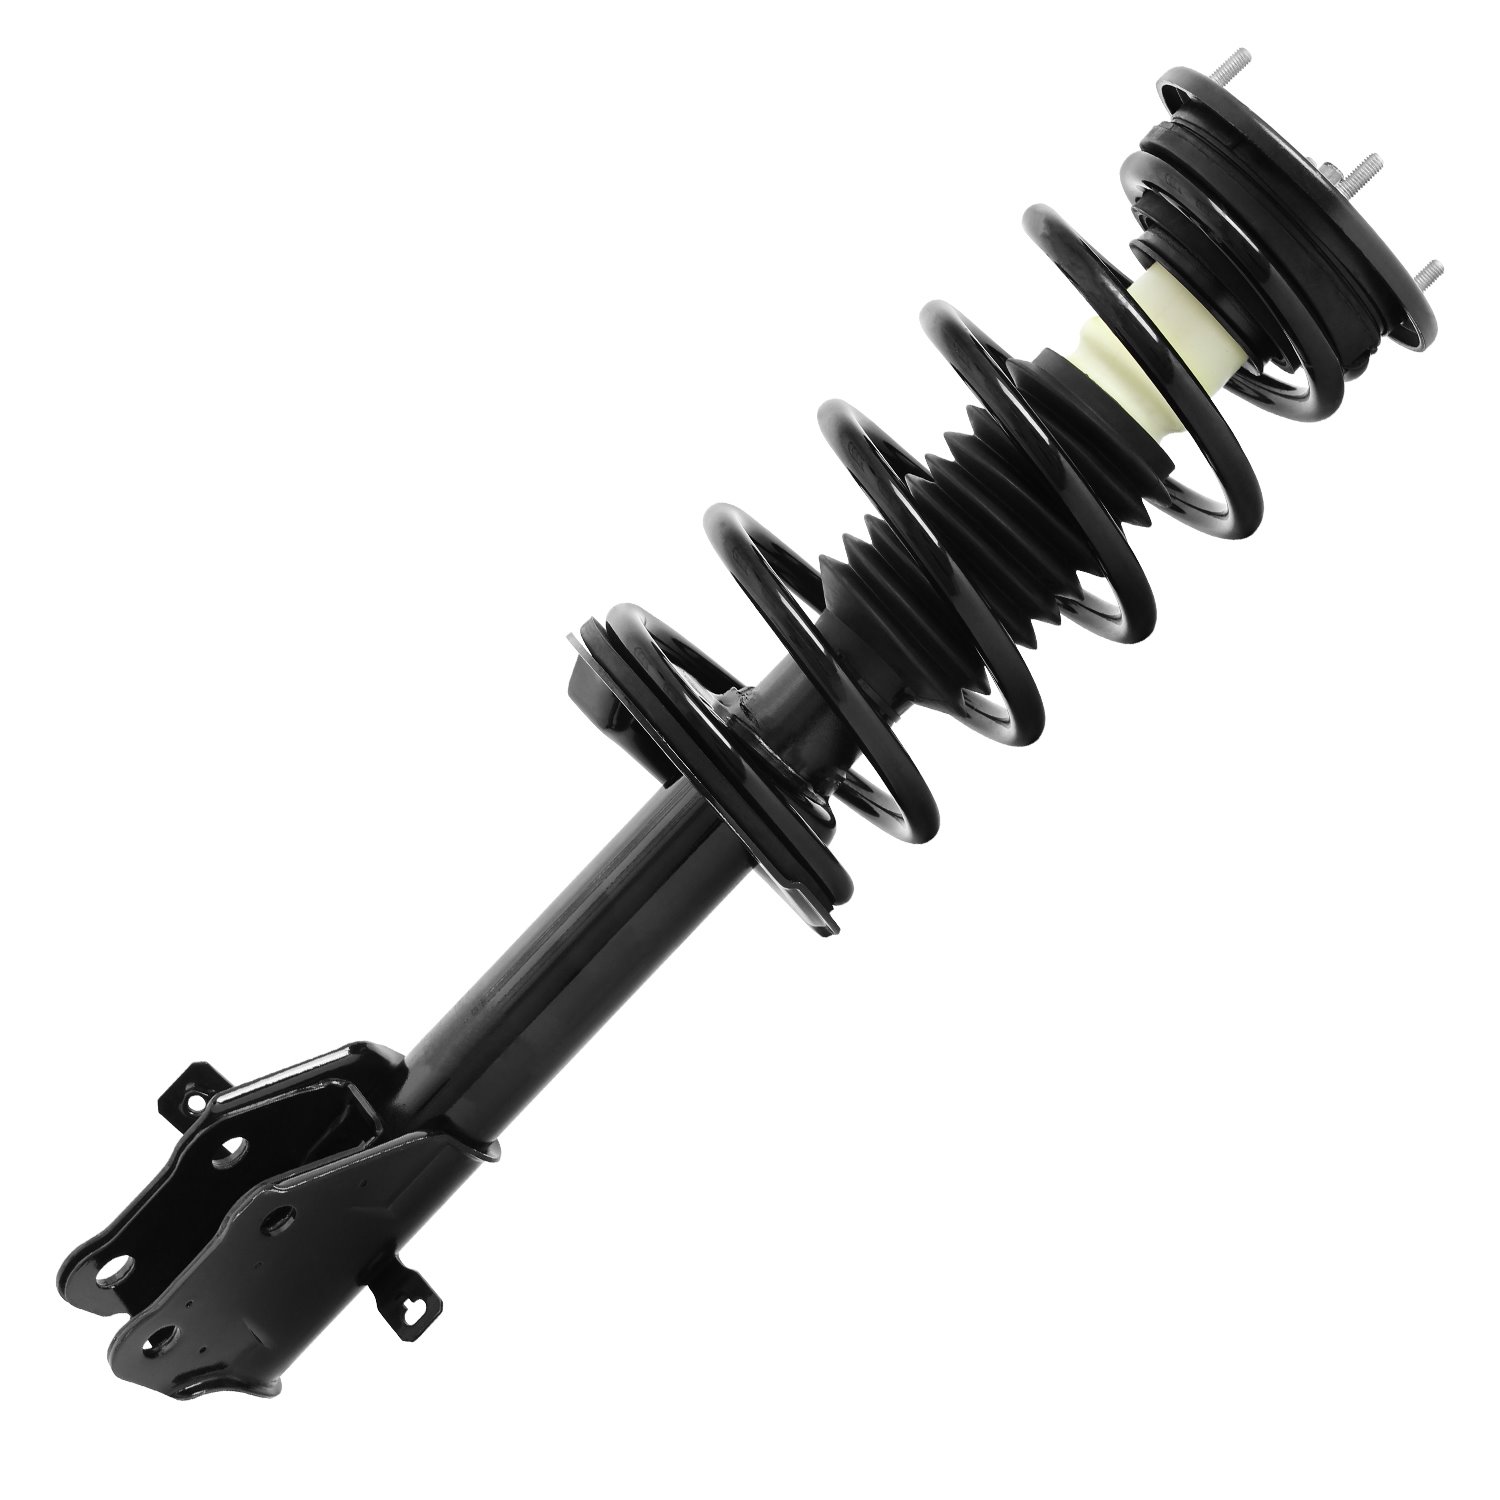 11995 Suspension Strut & Coil Spring Assembly Fits Select Ford Edge, Lincoln MKX